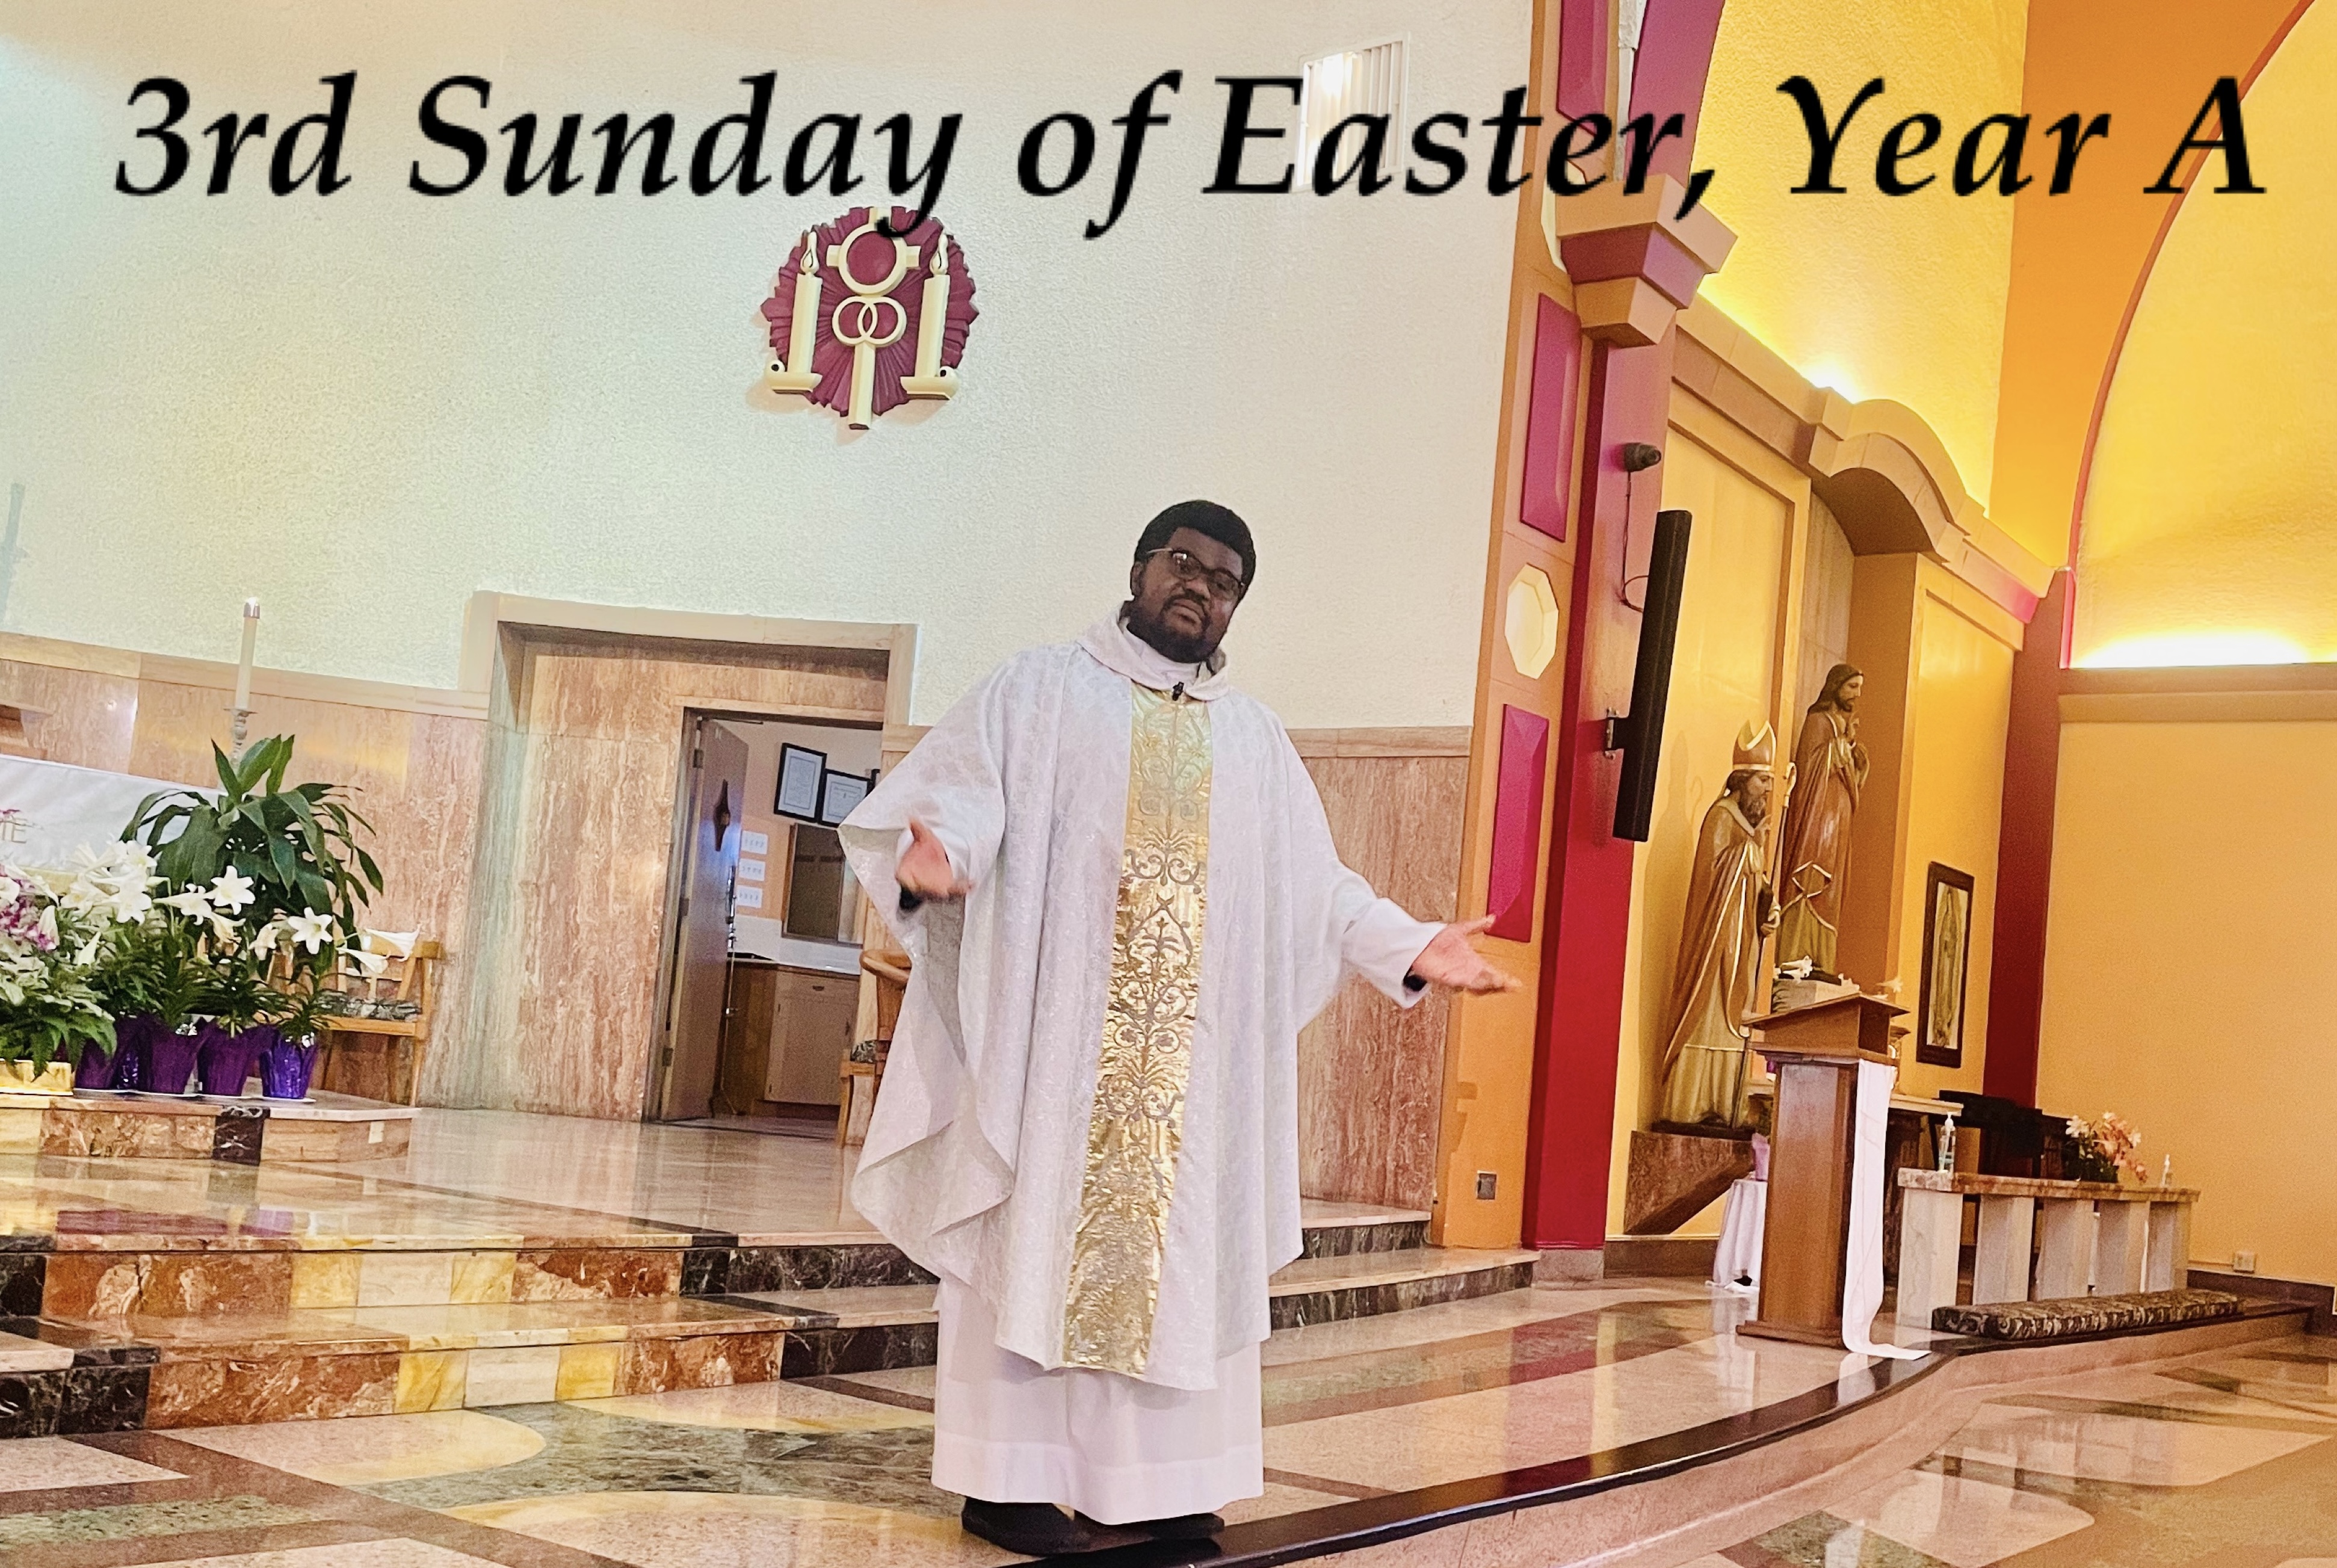 3rd Sunday of Easter, Year A